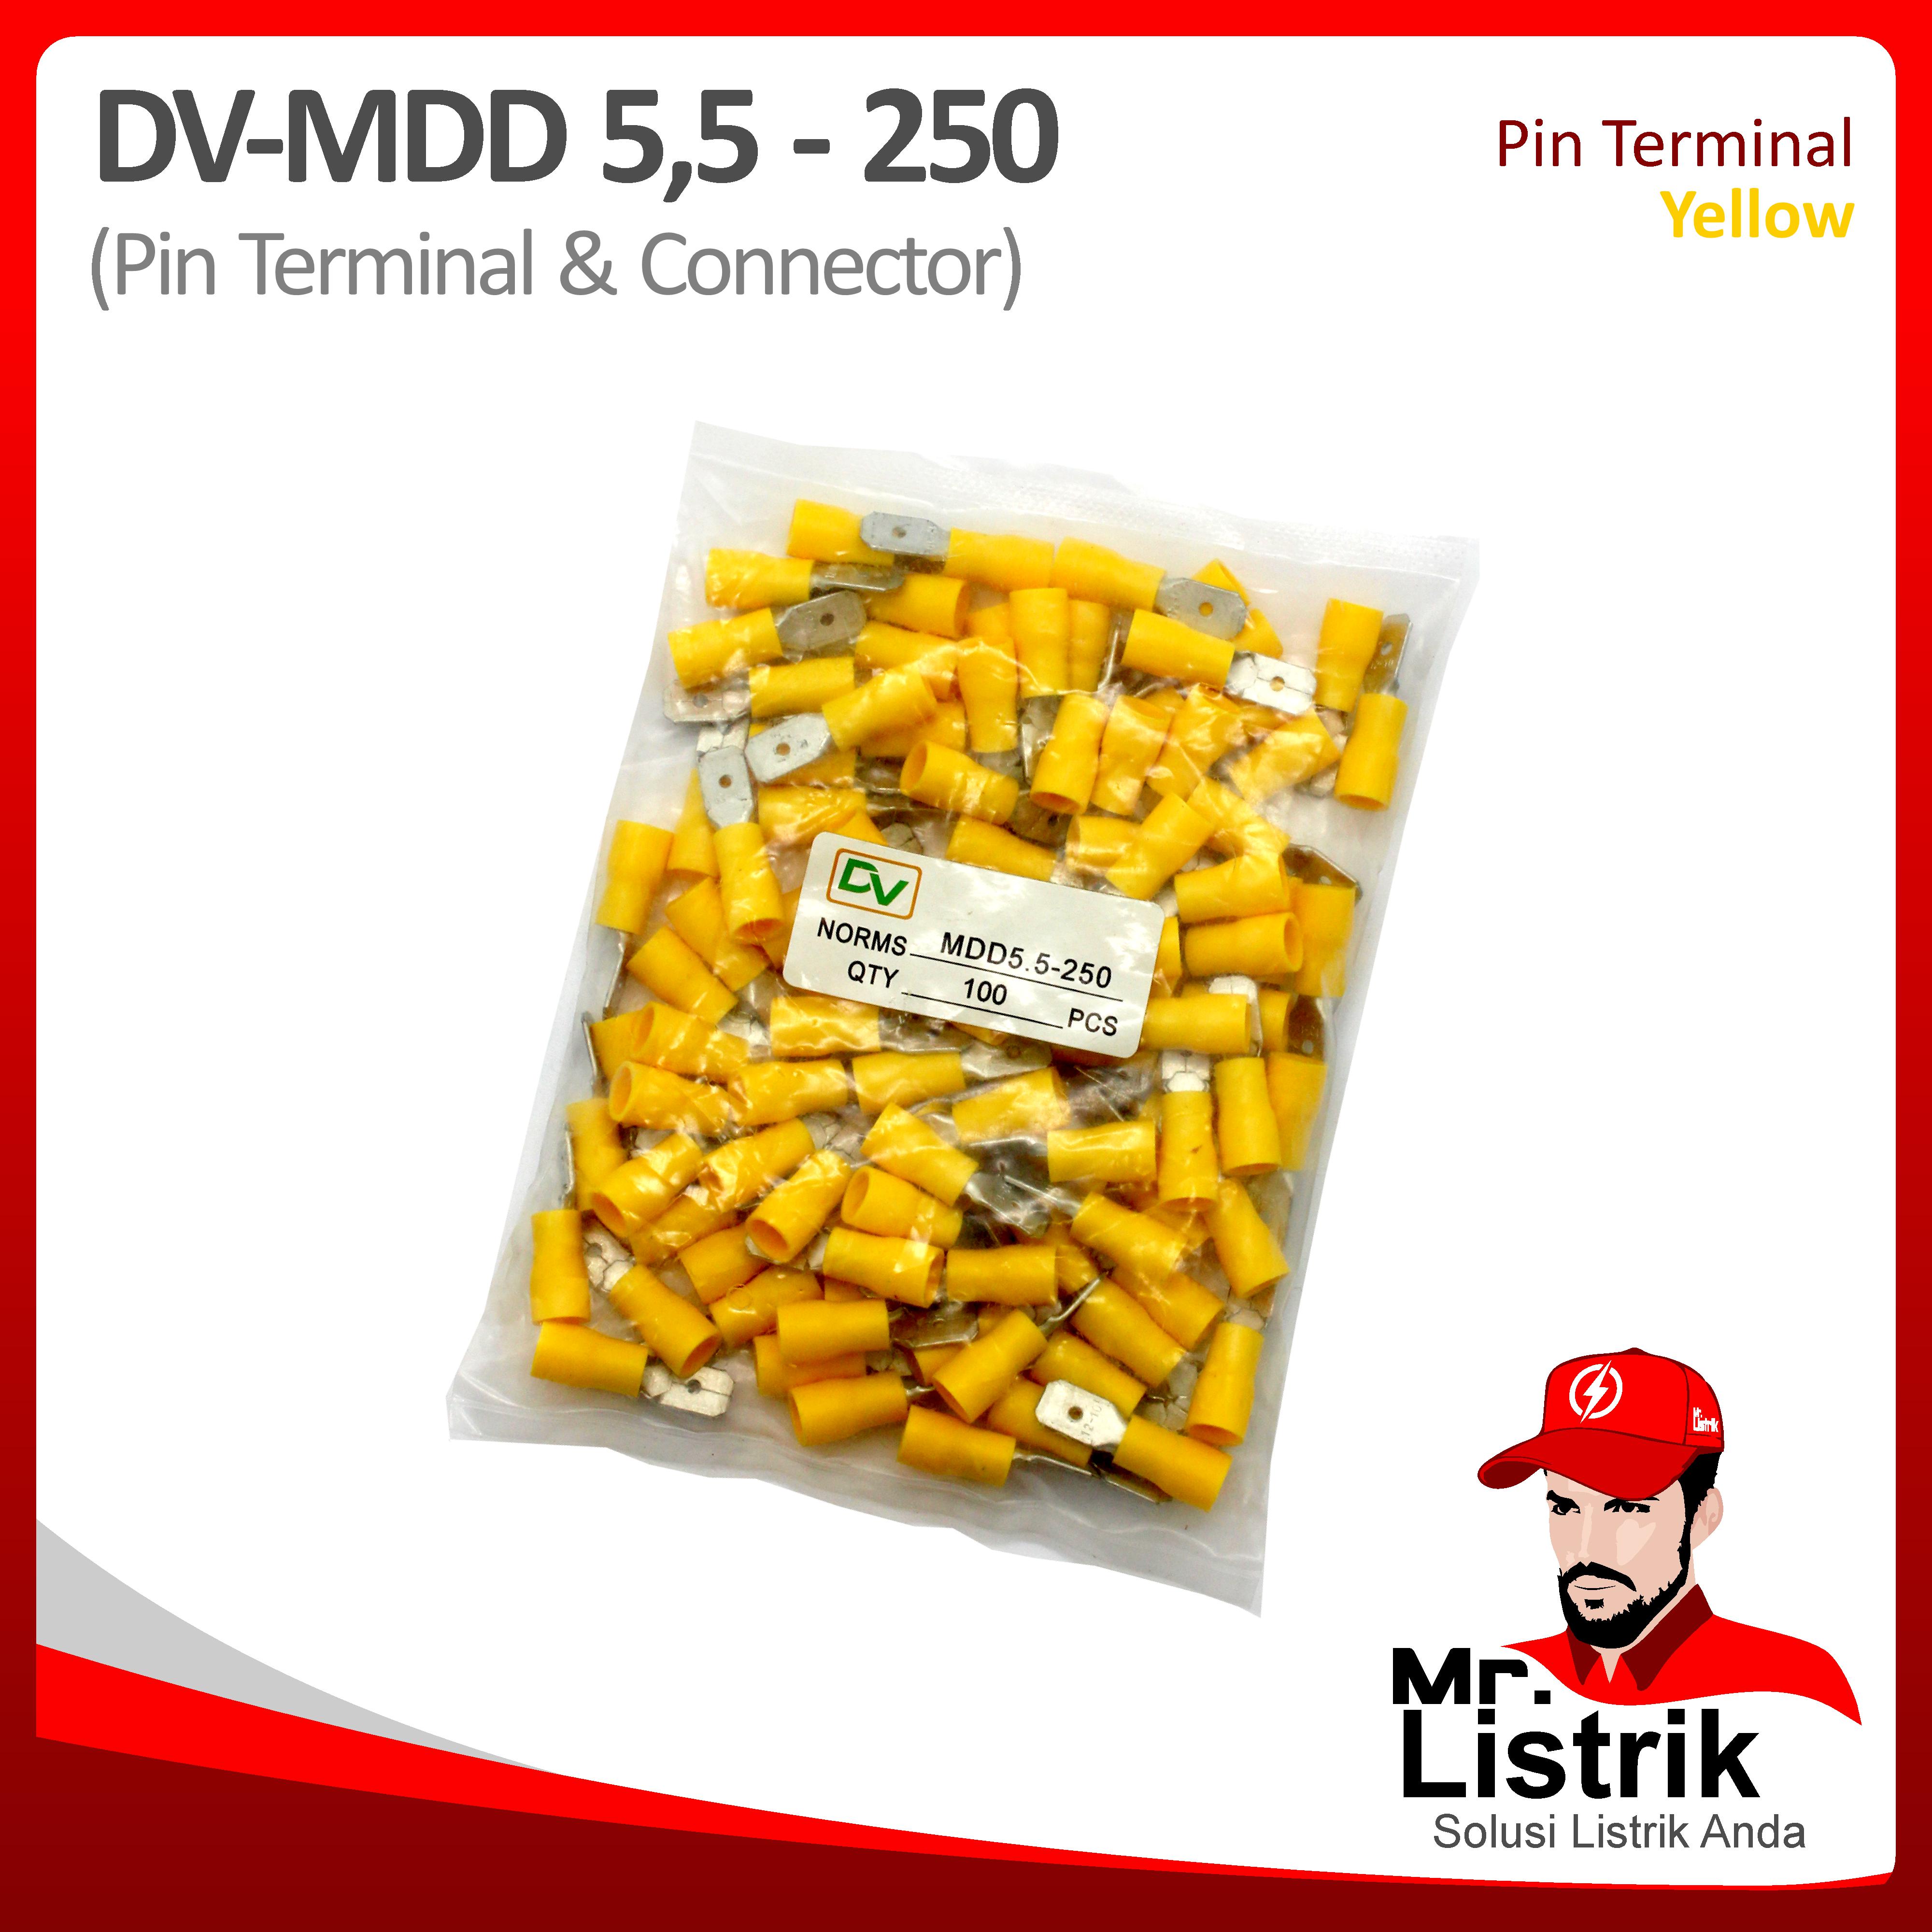 Male Disconnect 4-6mm Yellow DV MDD5.5-250